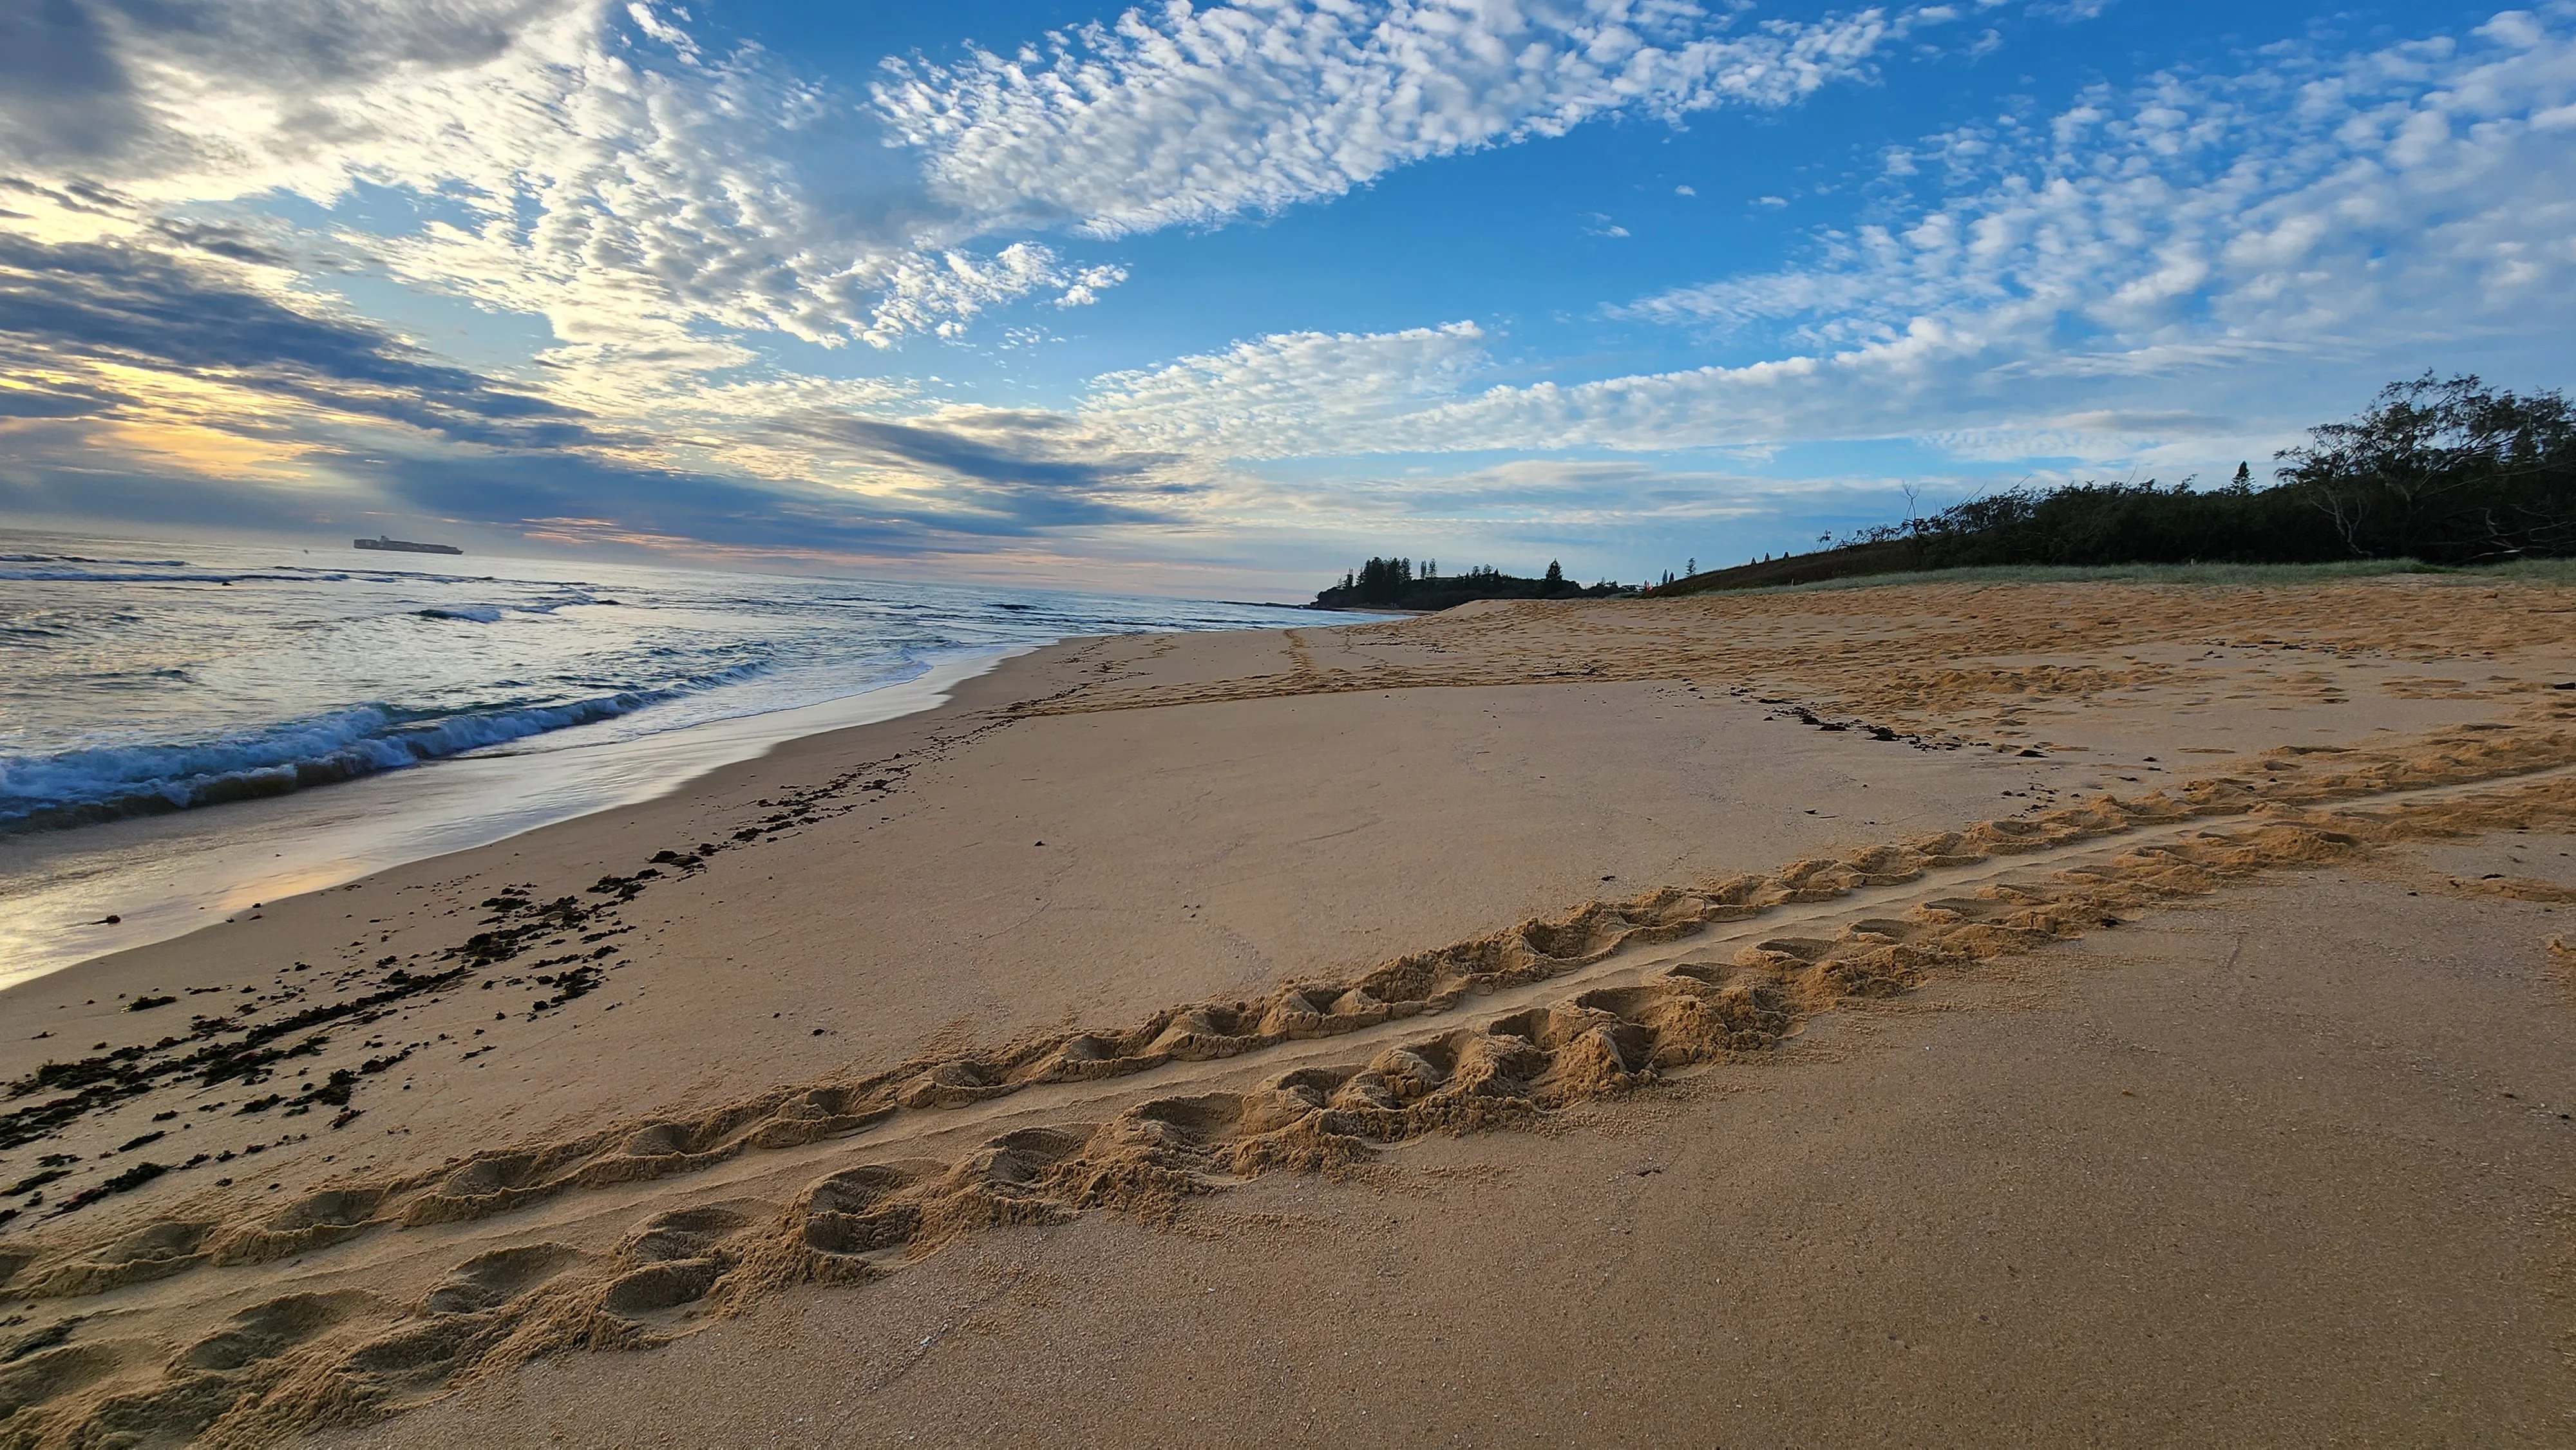 Early morning turtle tracks at Shelly Beach. Credit Sue Moxon.